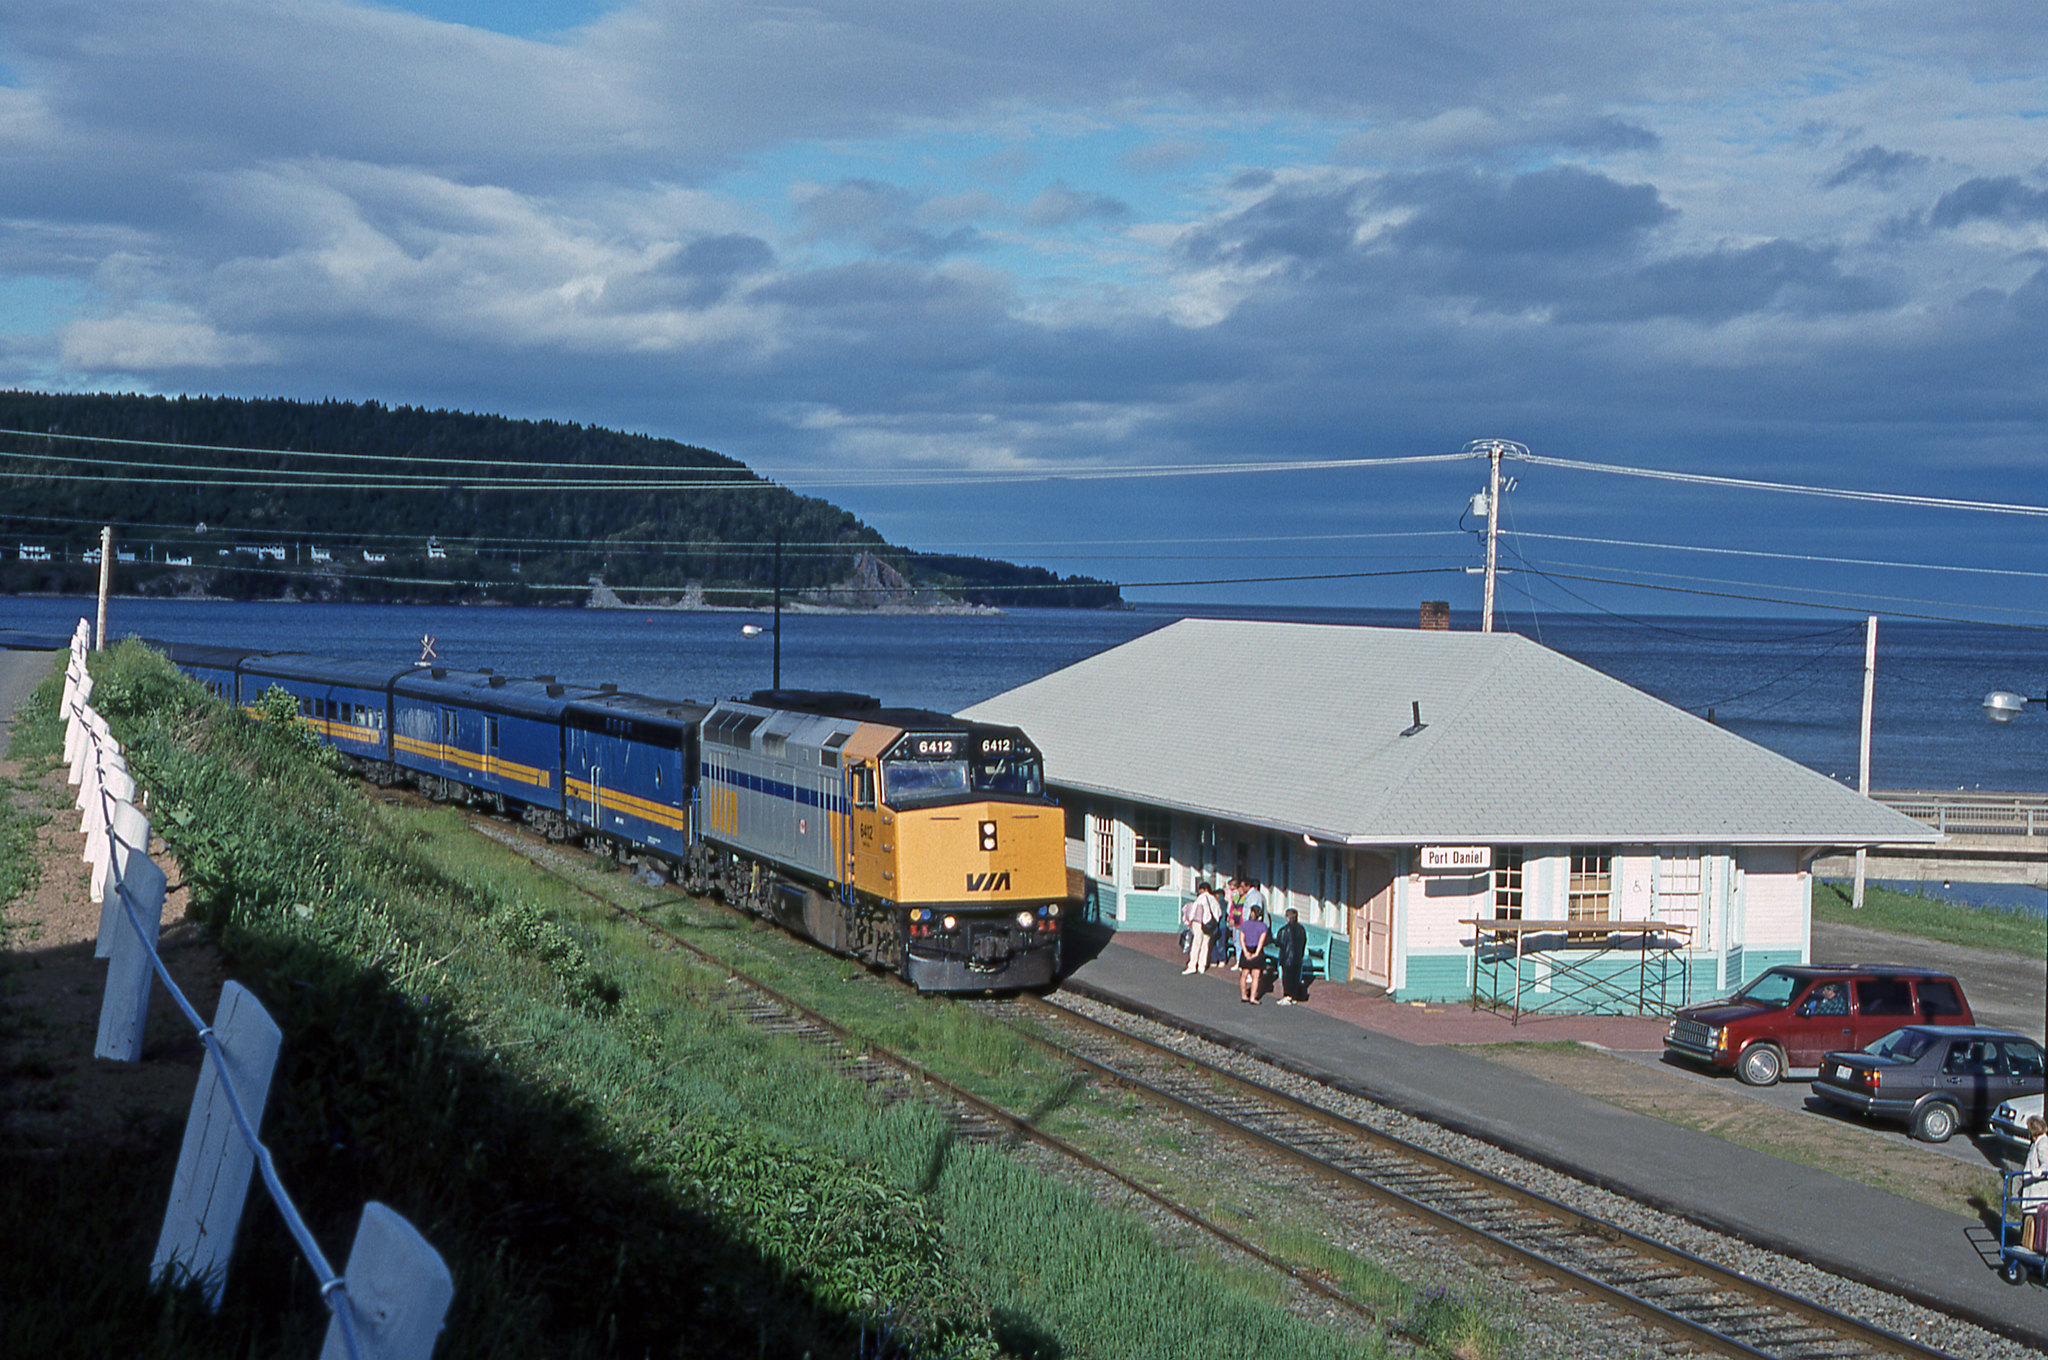 VIA # 17, the westbound Chaleur, slows for its station stop at Port-Daniel. The long days of early summer often played well when chasing and photographing trains along the Gaspé Peninsula.

Port-Daniel, Quebec.
Monday, July 1, 1991